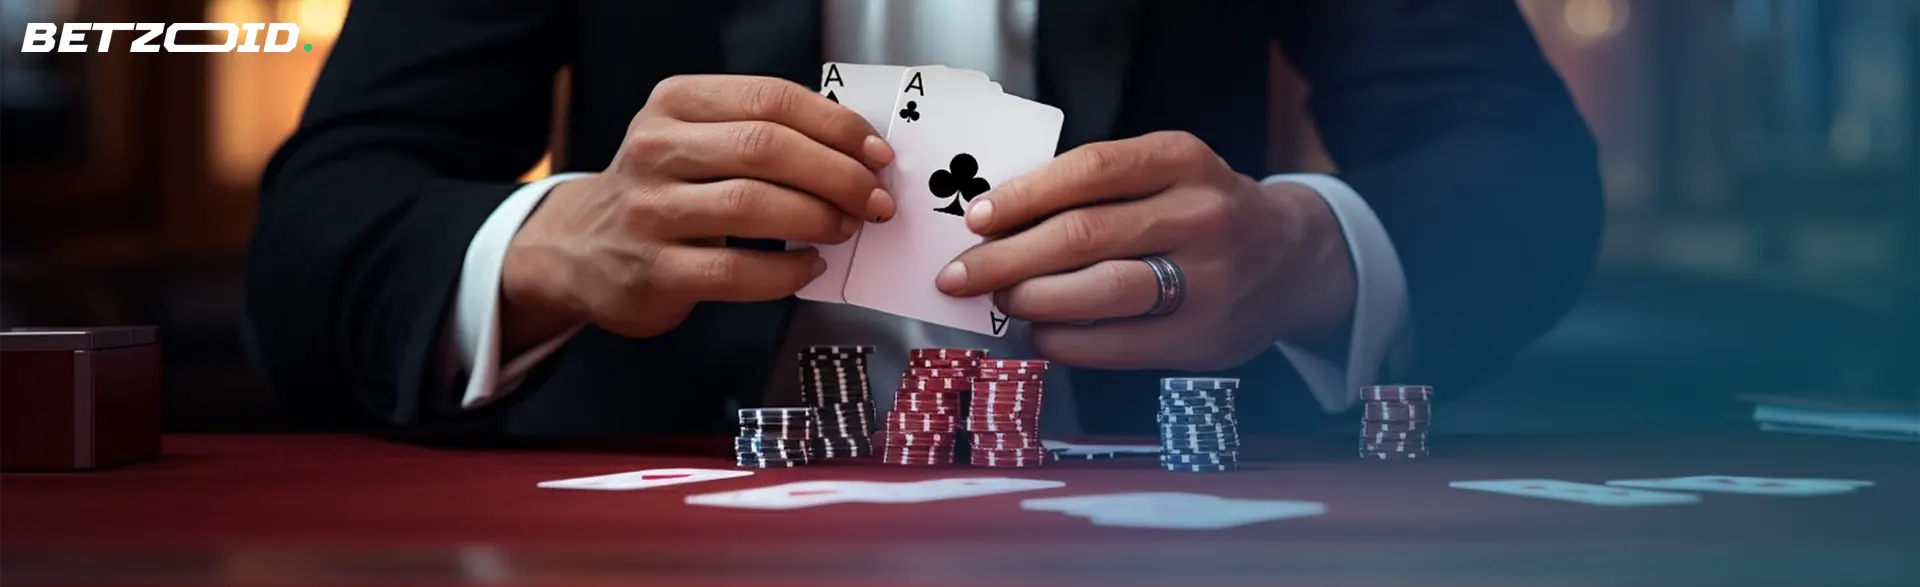 A poker player's hands holding aces, indicative of the high stakes in the best Android casino apps.